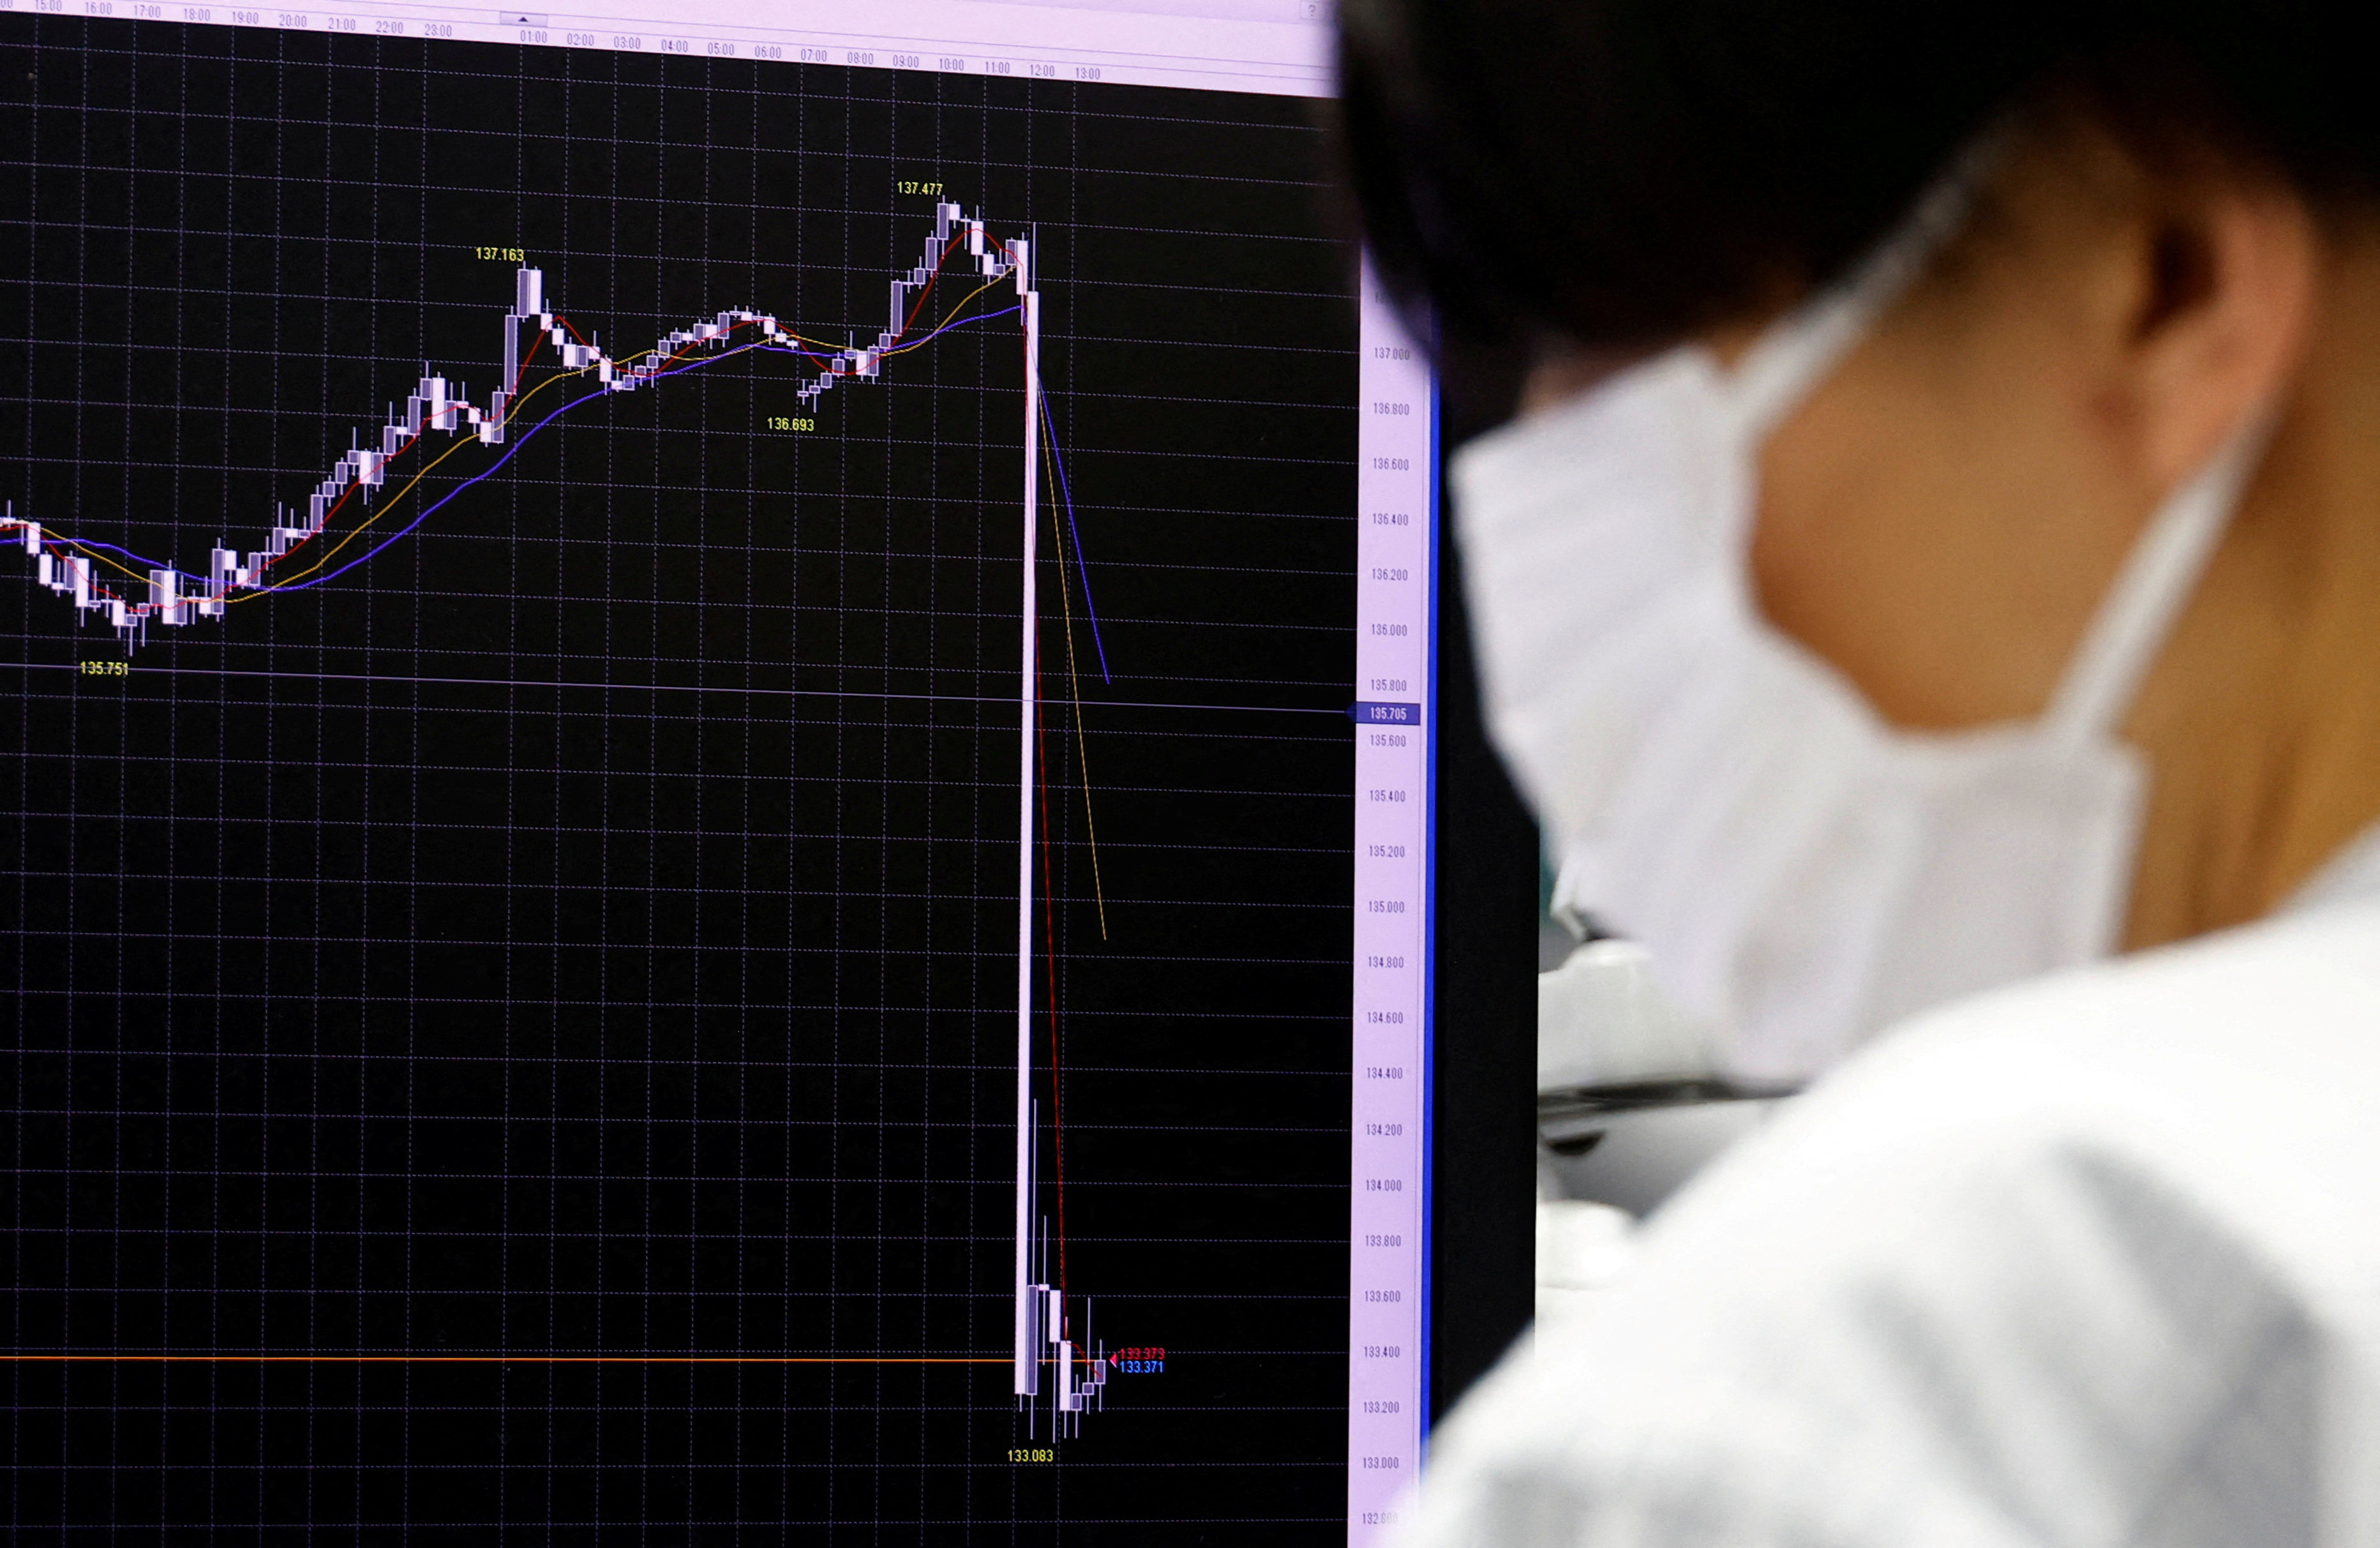 An employee of the foreign exchange trading company Gaitame.com works in front of a monitor showing a graph of the Japanese yen exchange rate against the US dollar at its dealing room in Tokyo on December 20. Photo: Reuters